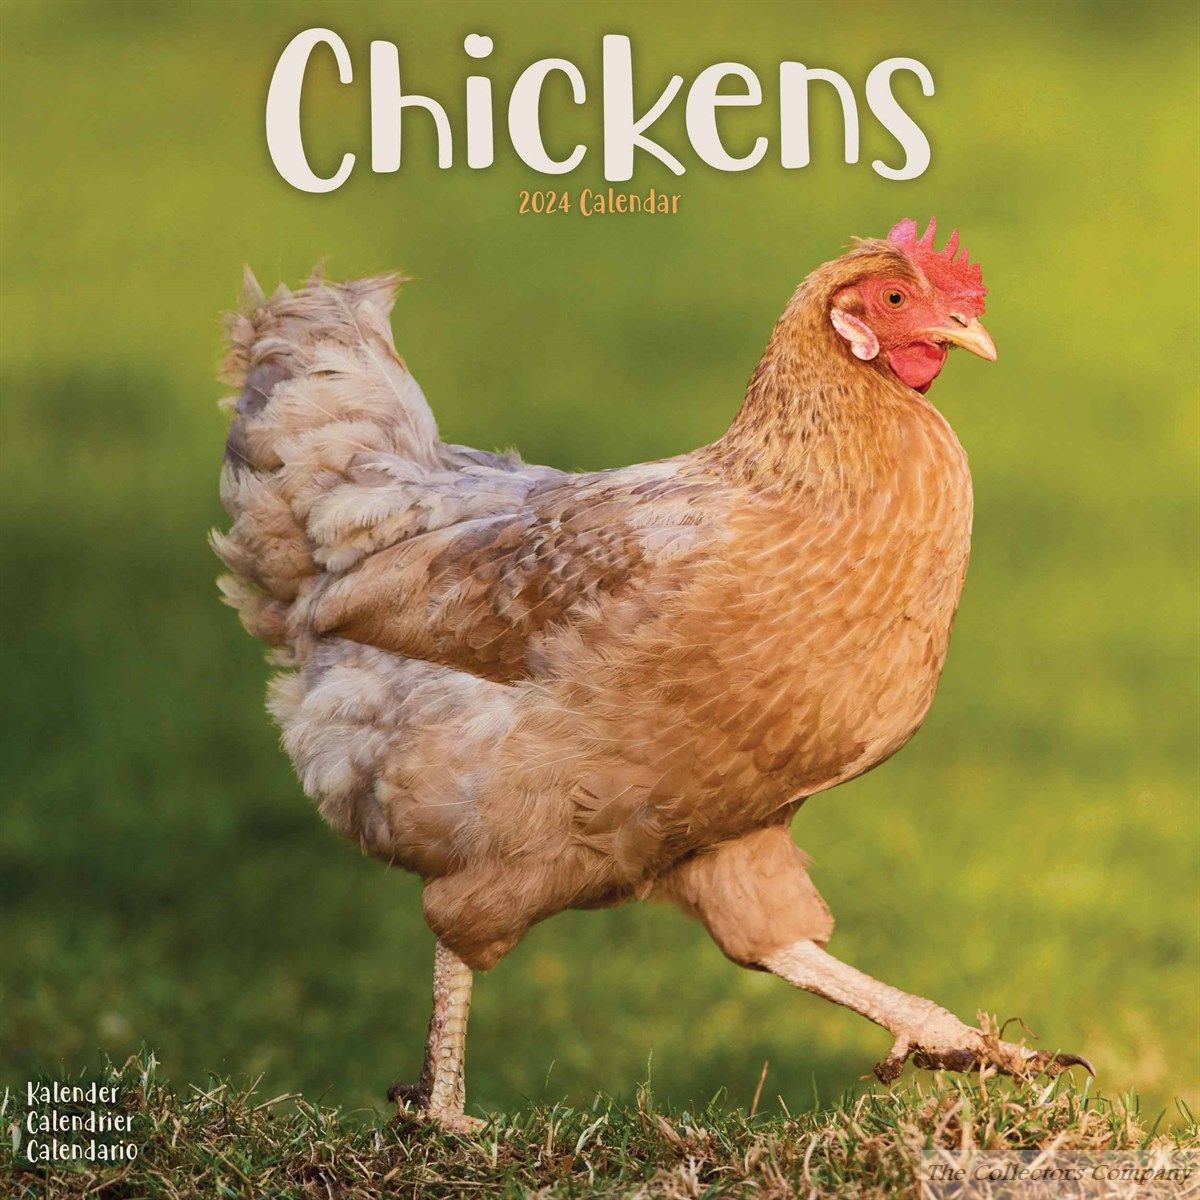 Chickens Wall Calendar 2024 by Avonside publishing 240619